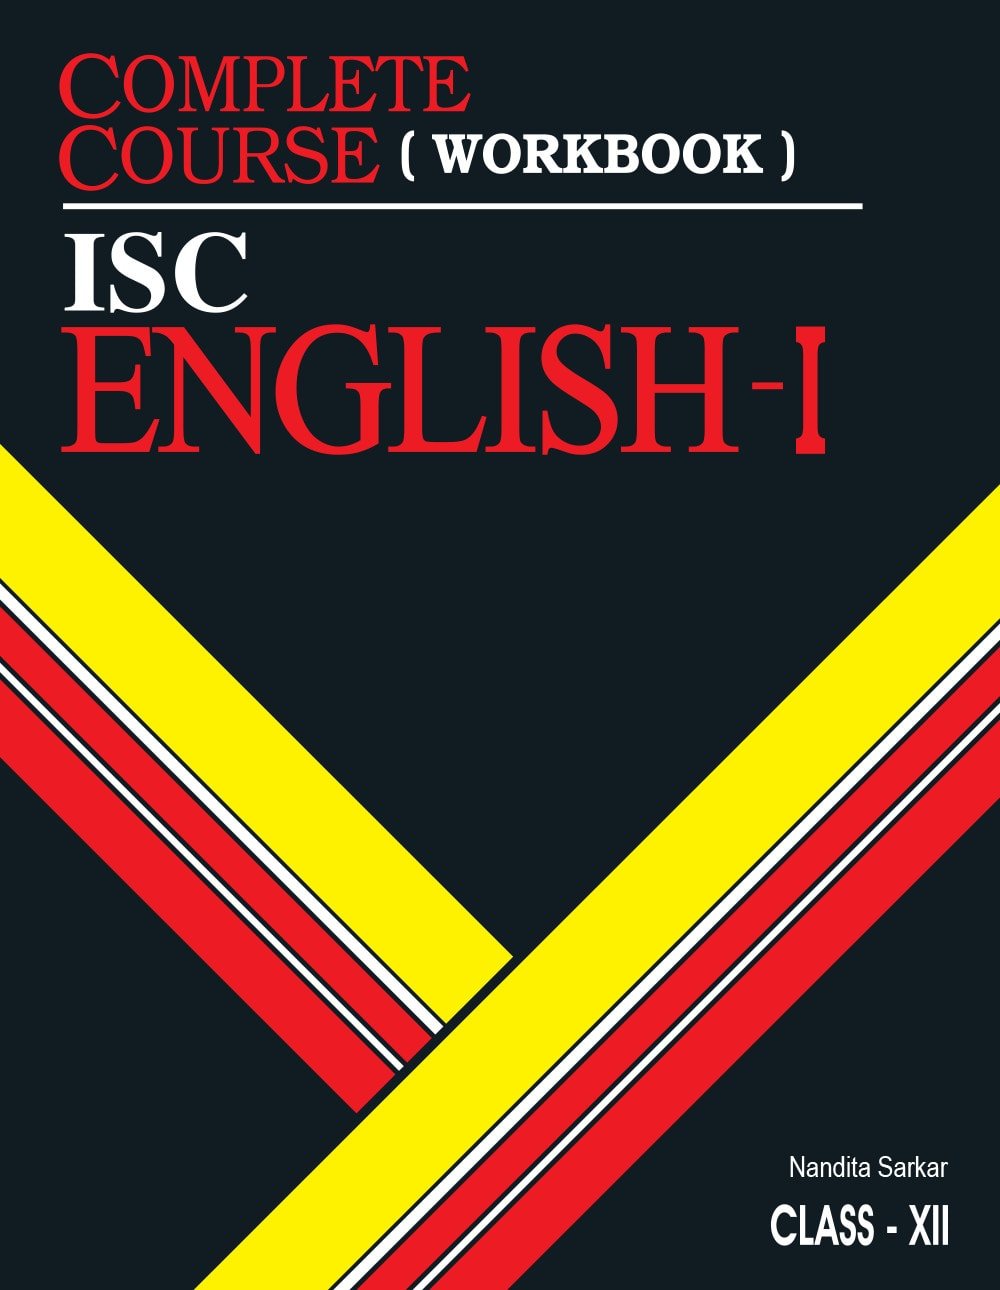 Oswal Complete Course Workbook English 1: ISC Class 12